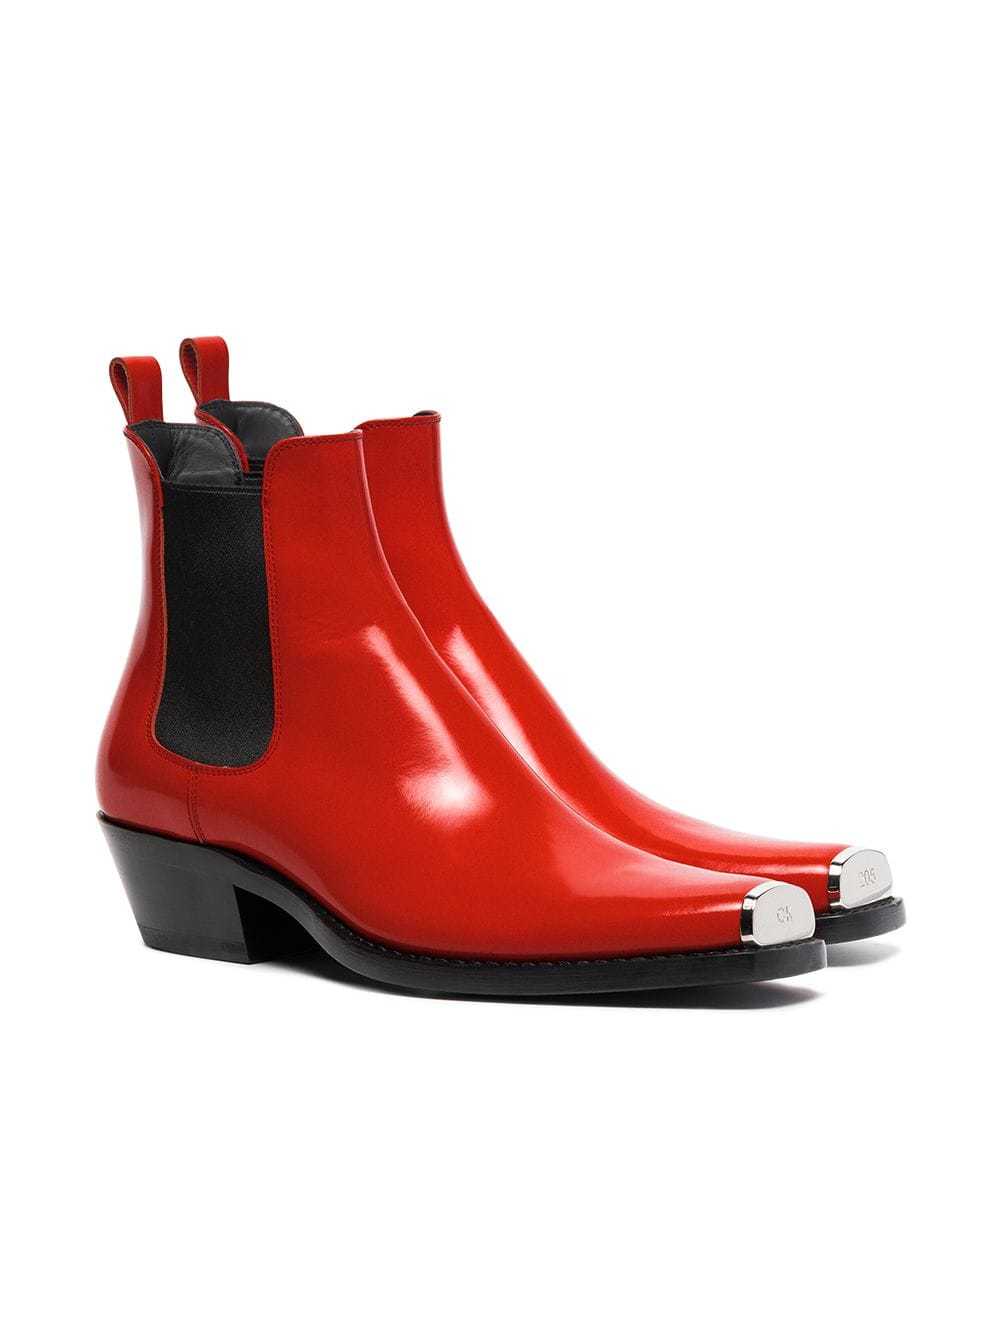 Calvin Klein 205W39nyc 55 Red Western Ankle Boots, $1,097  |  Lookastic